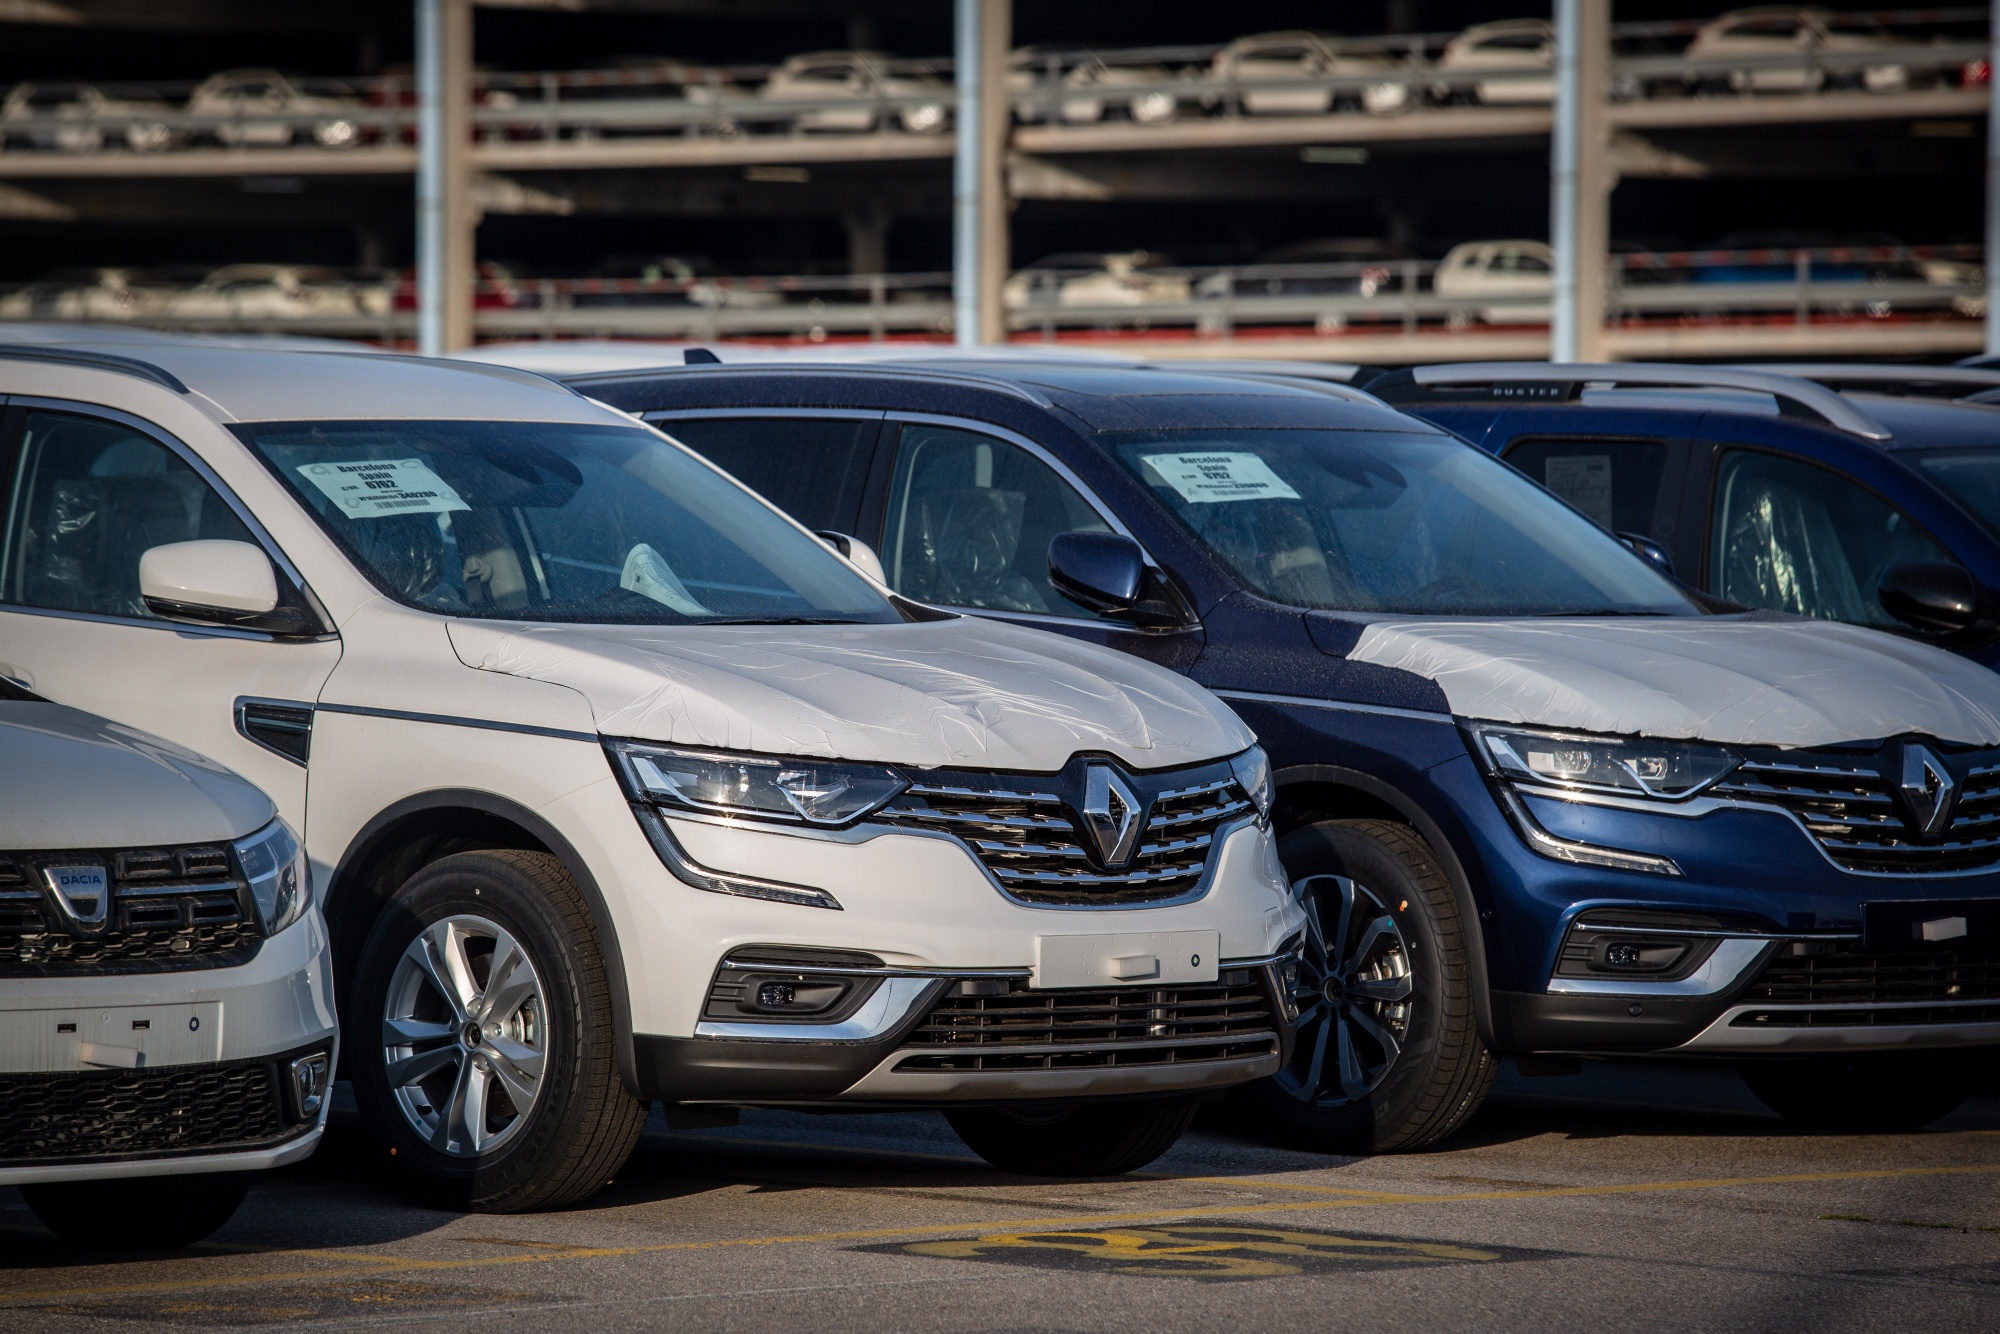 Newly manufactured Renault SA automobiles at Barcelona commercial port in Spain in March.